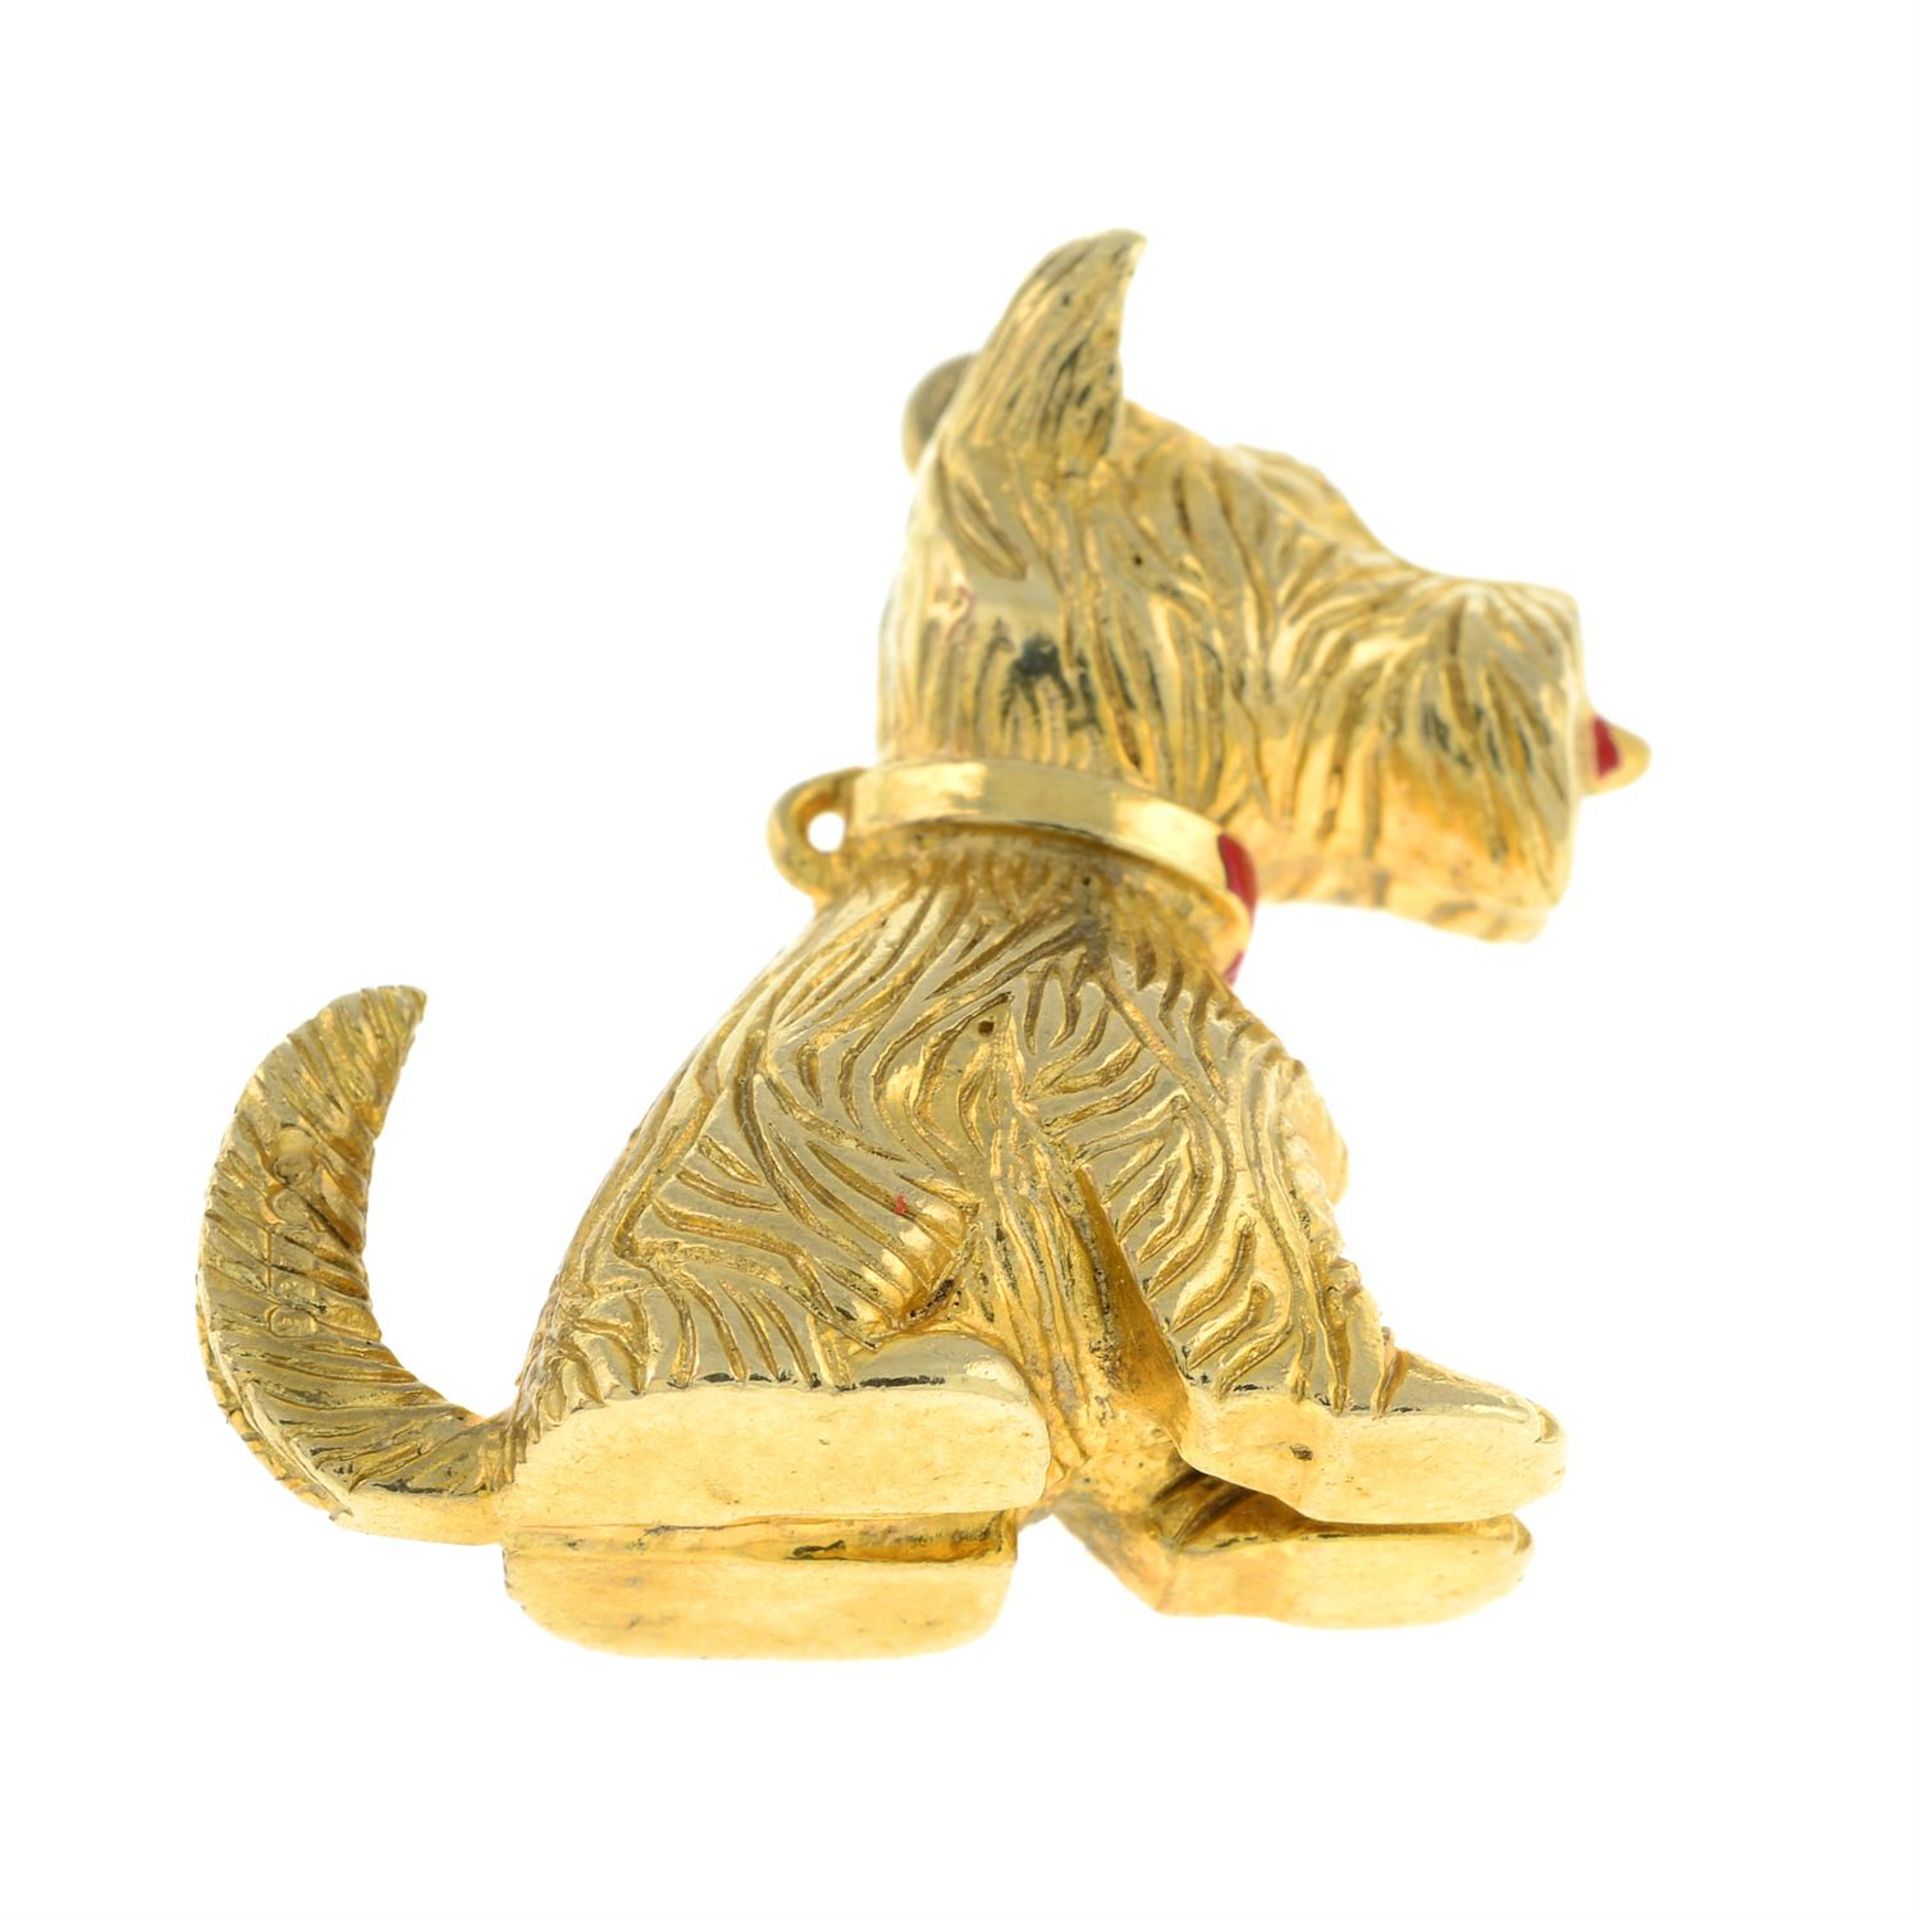 A 9ct gold textured dog charm, with red enamel collar and tongue. - Image 2 of 2